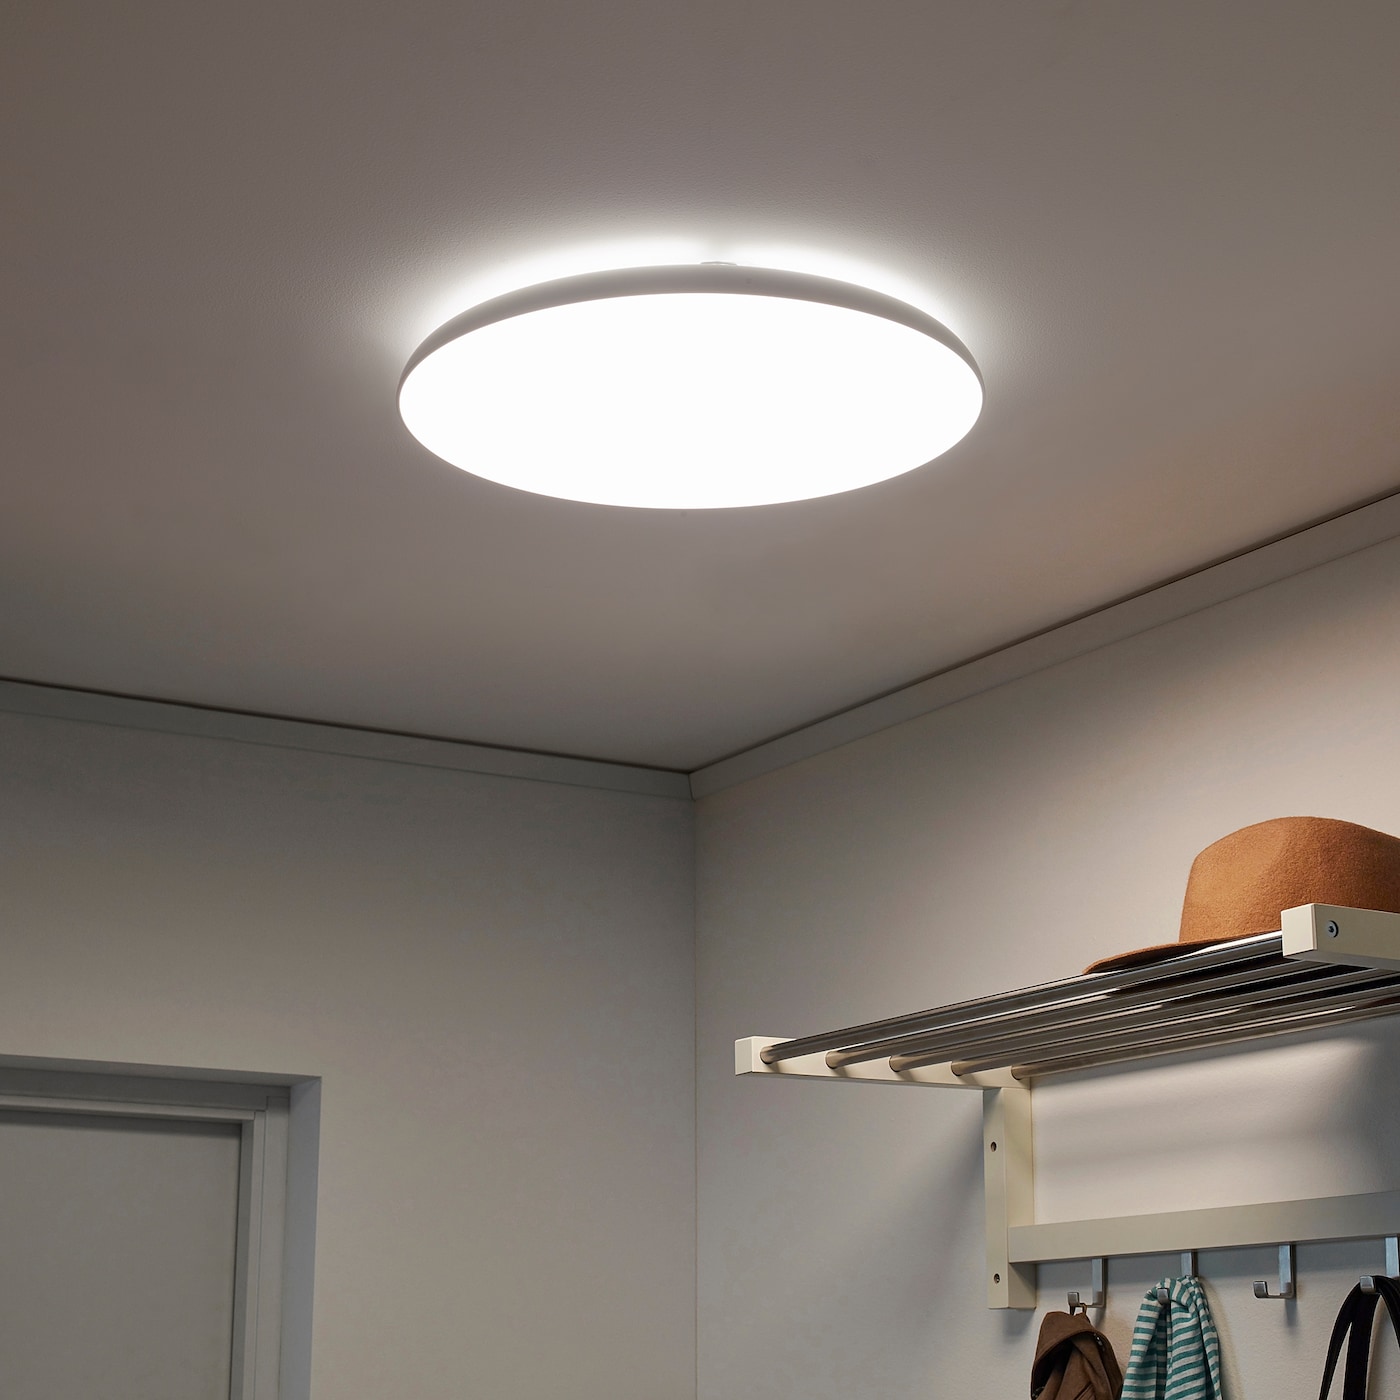 A Guide to Installing a Ceiling Light Without Existing Wiring插图